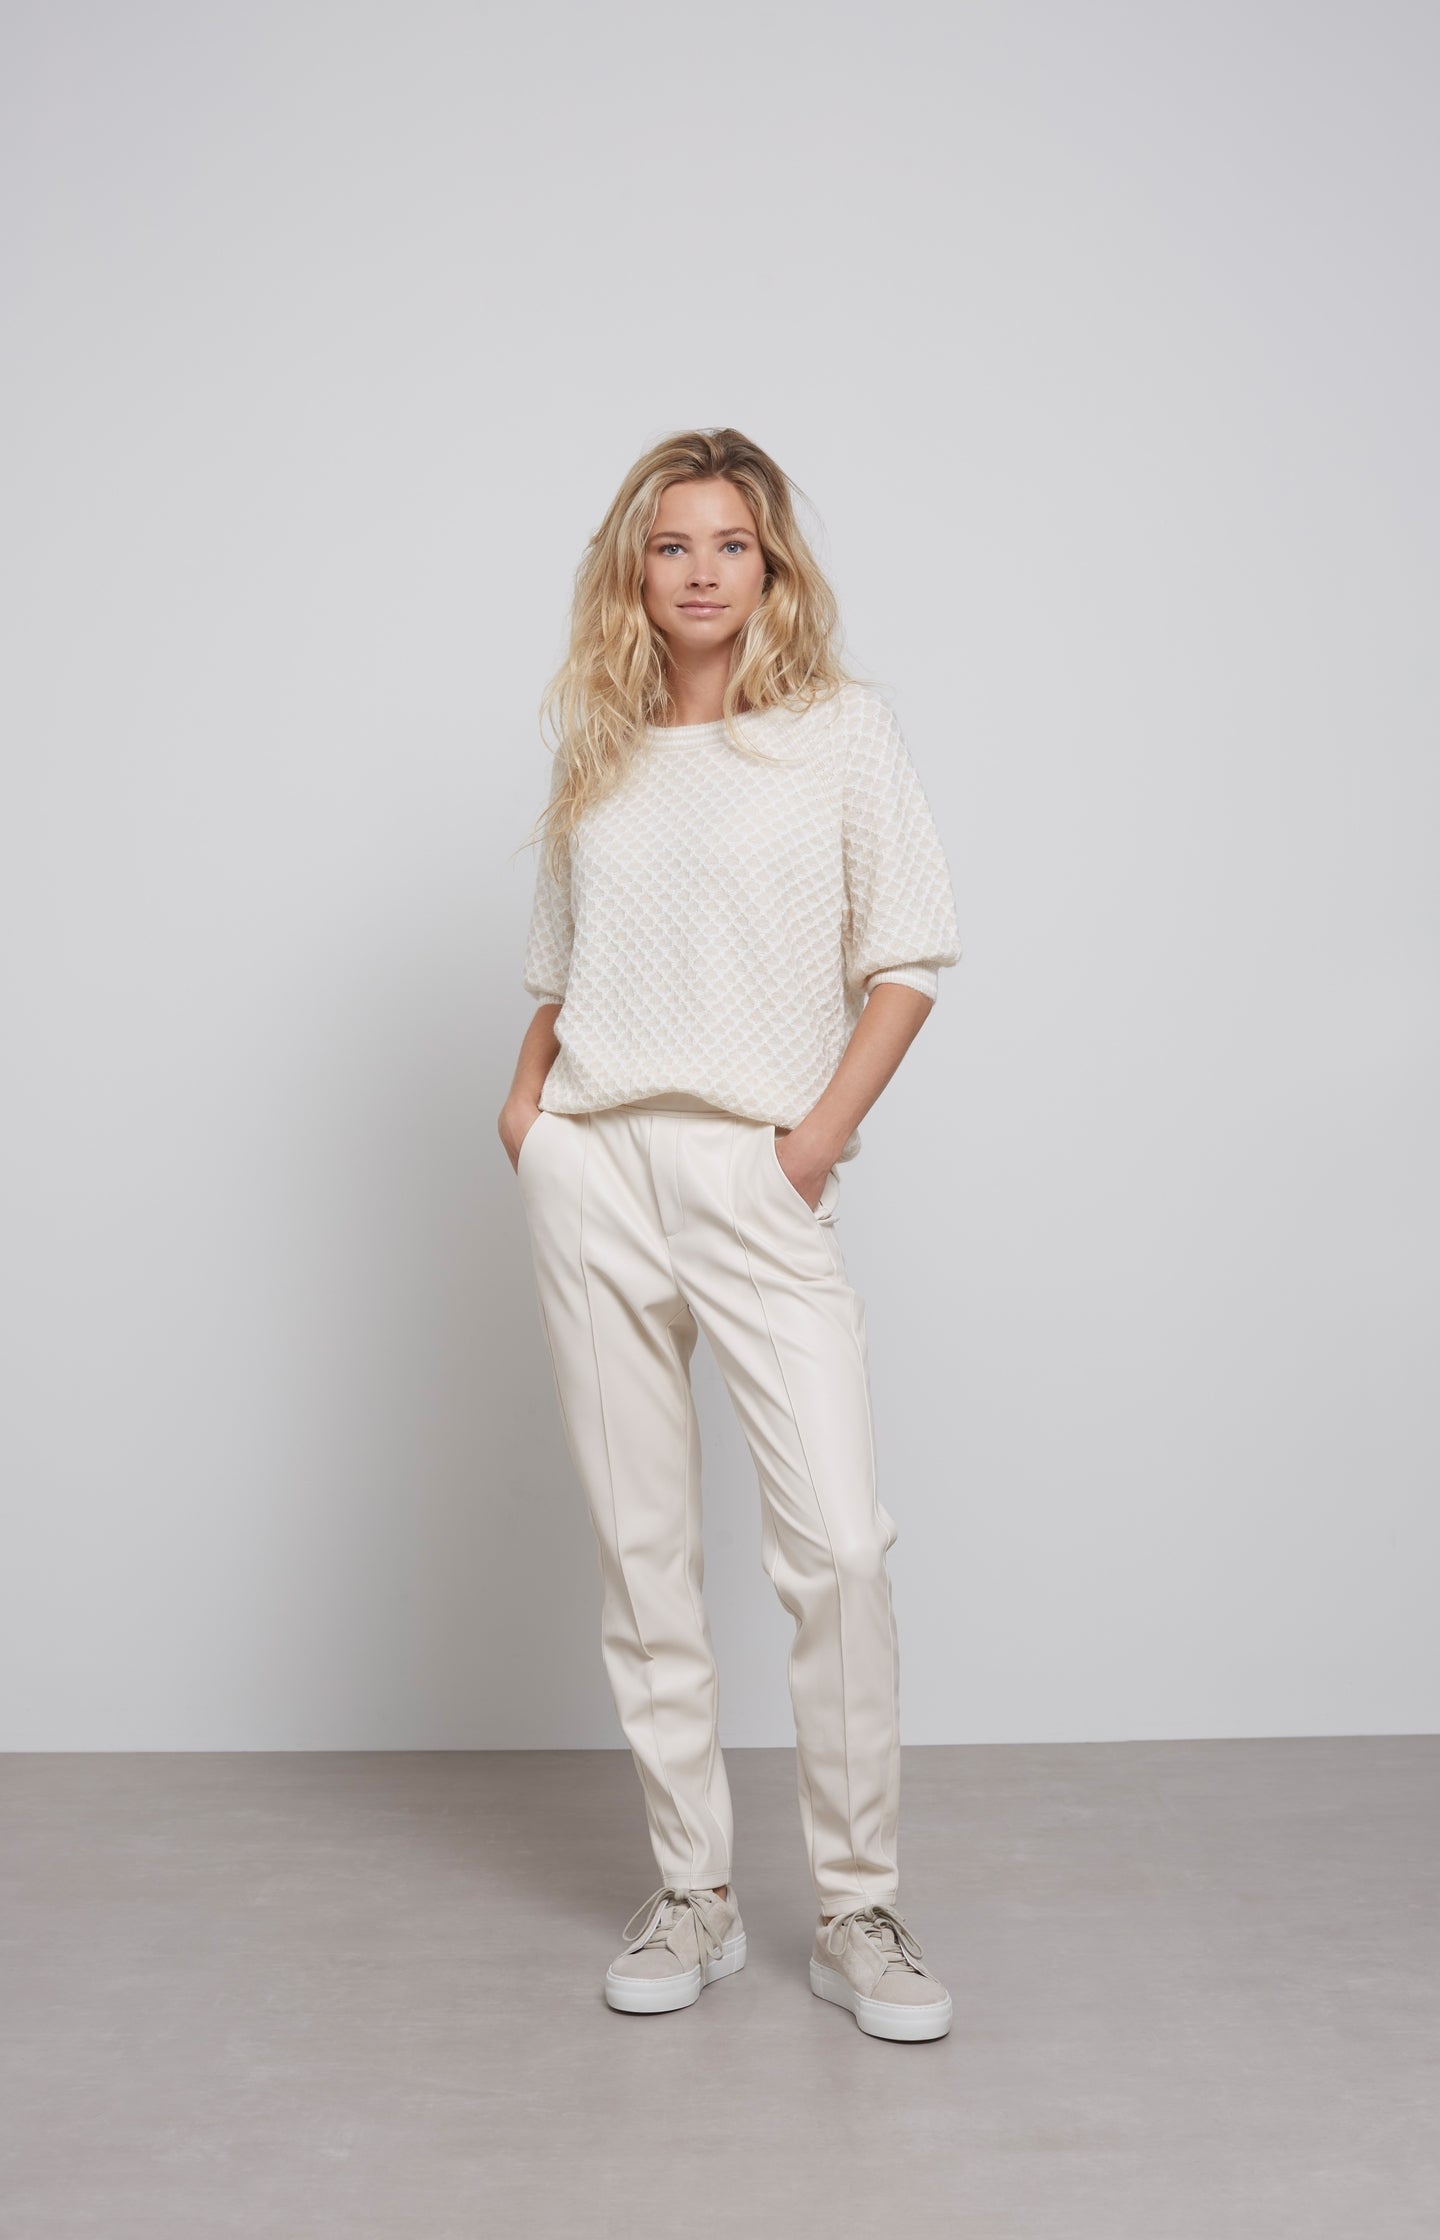 Faux leather trousers with side pockets and seam details - Type: lookbook